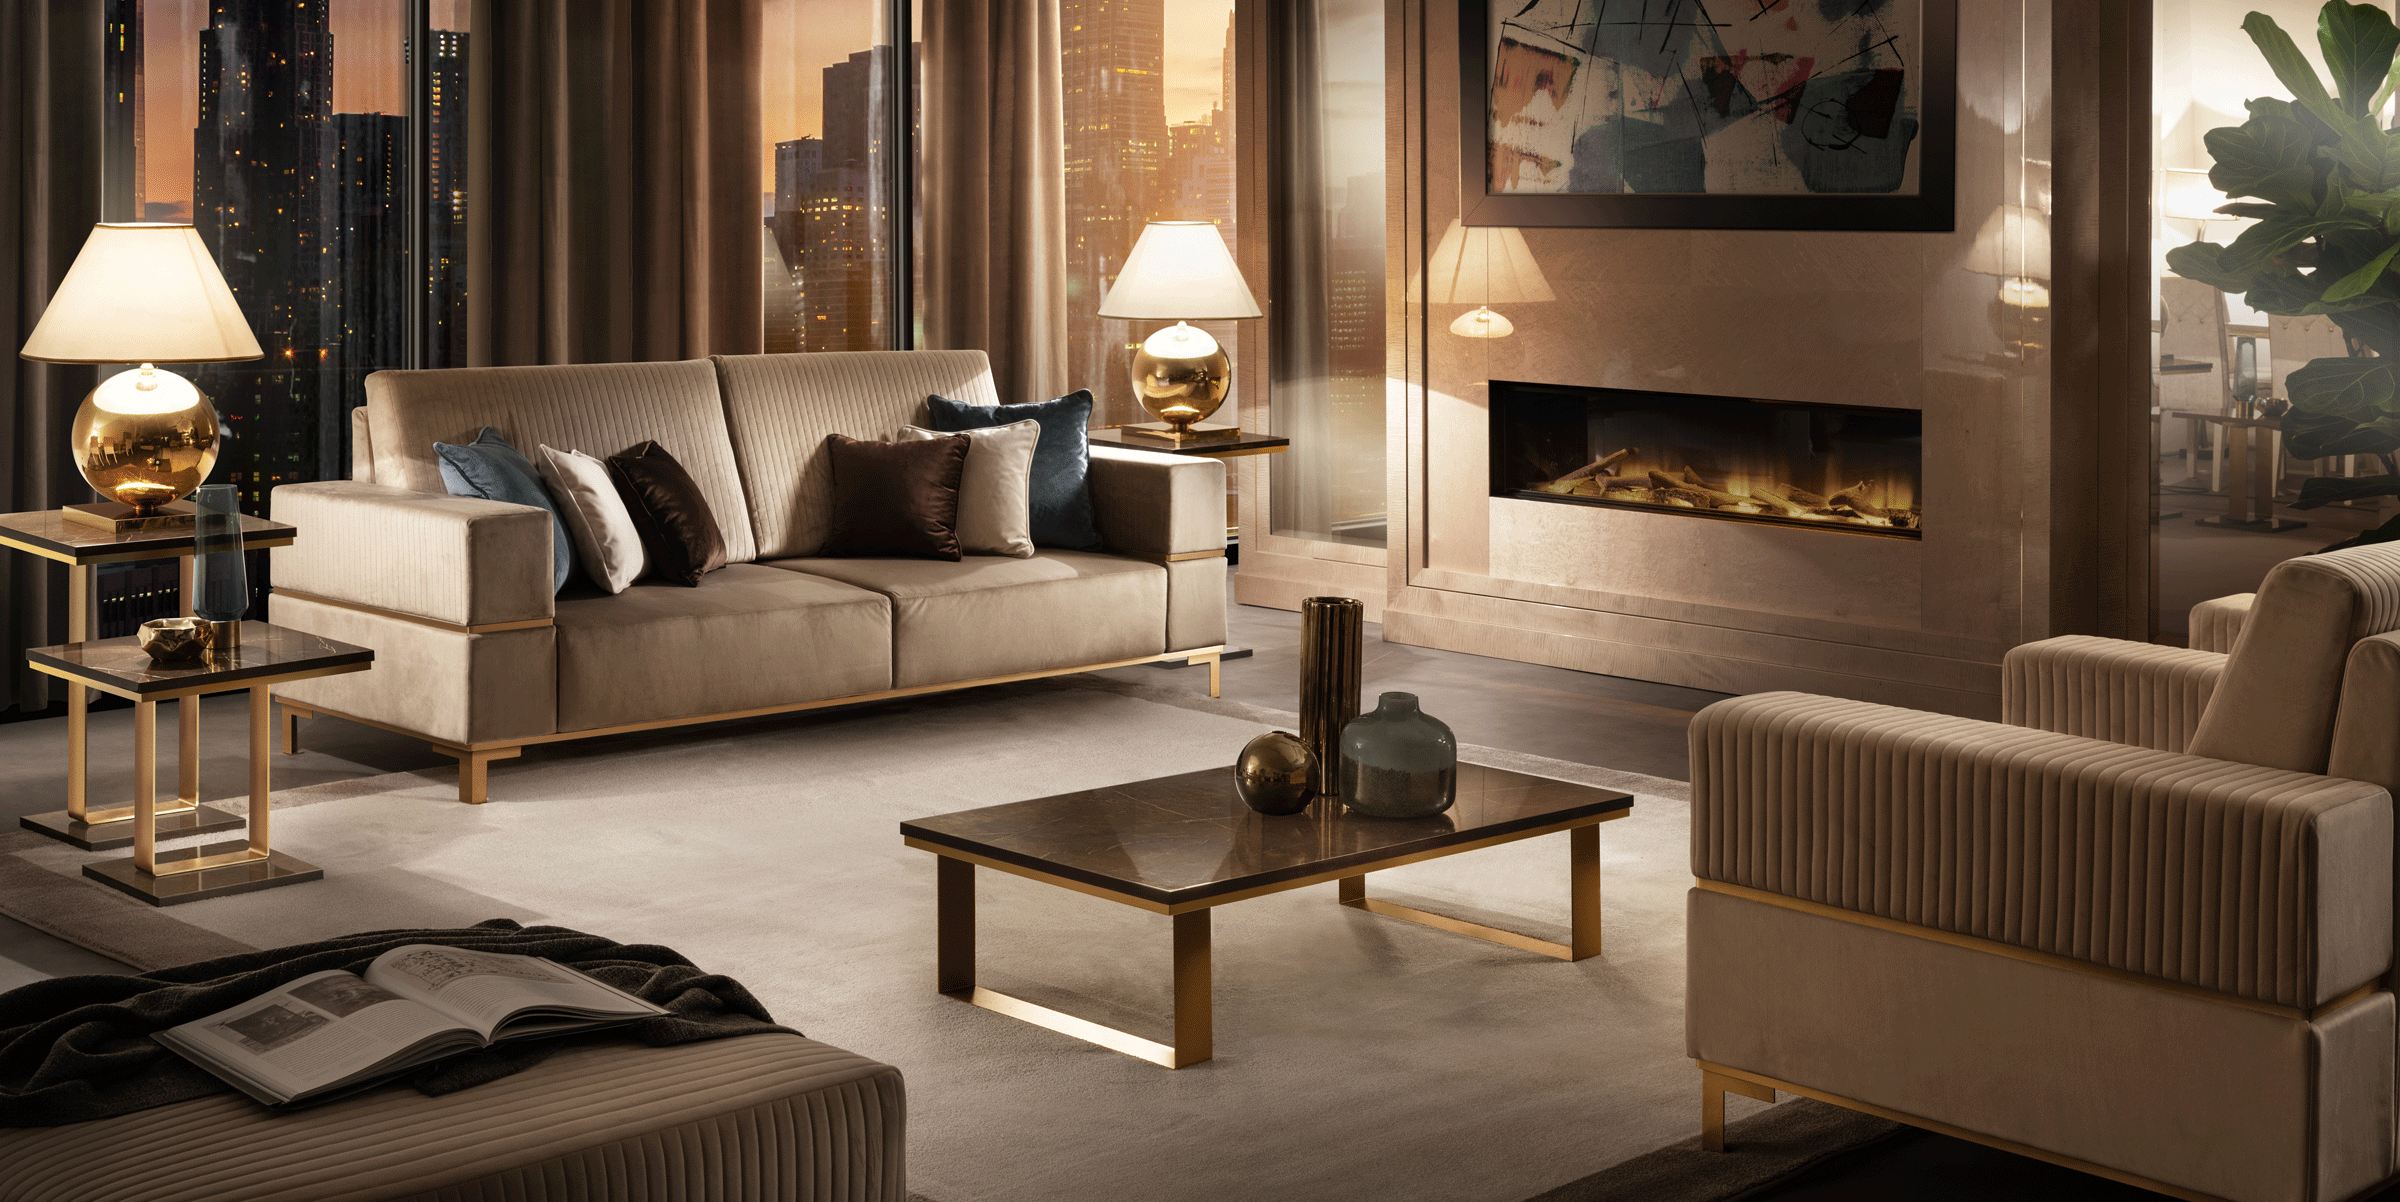 Living Room Furniture Sofas Loveseats and Chairs Essenza Living by Arredoclassic, Italy